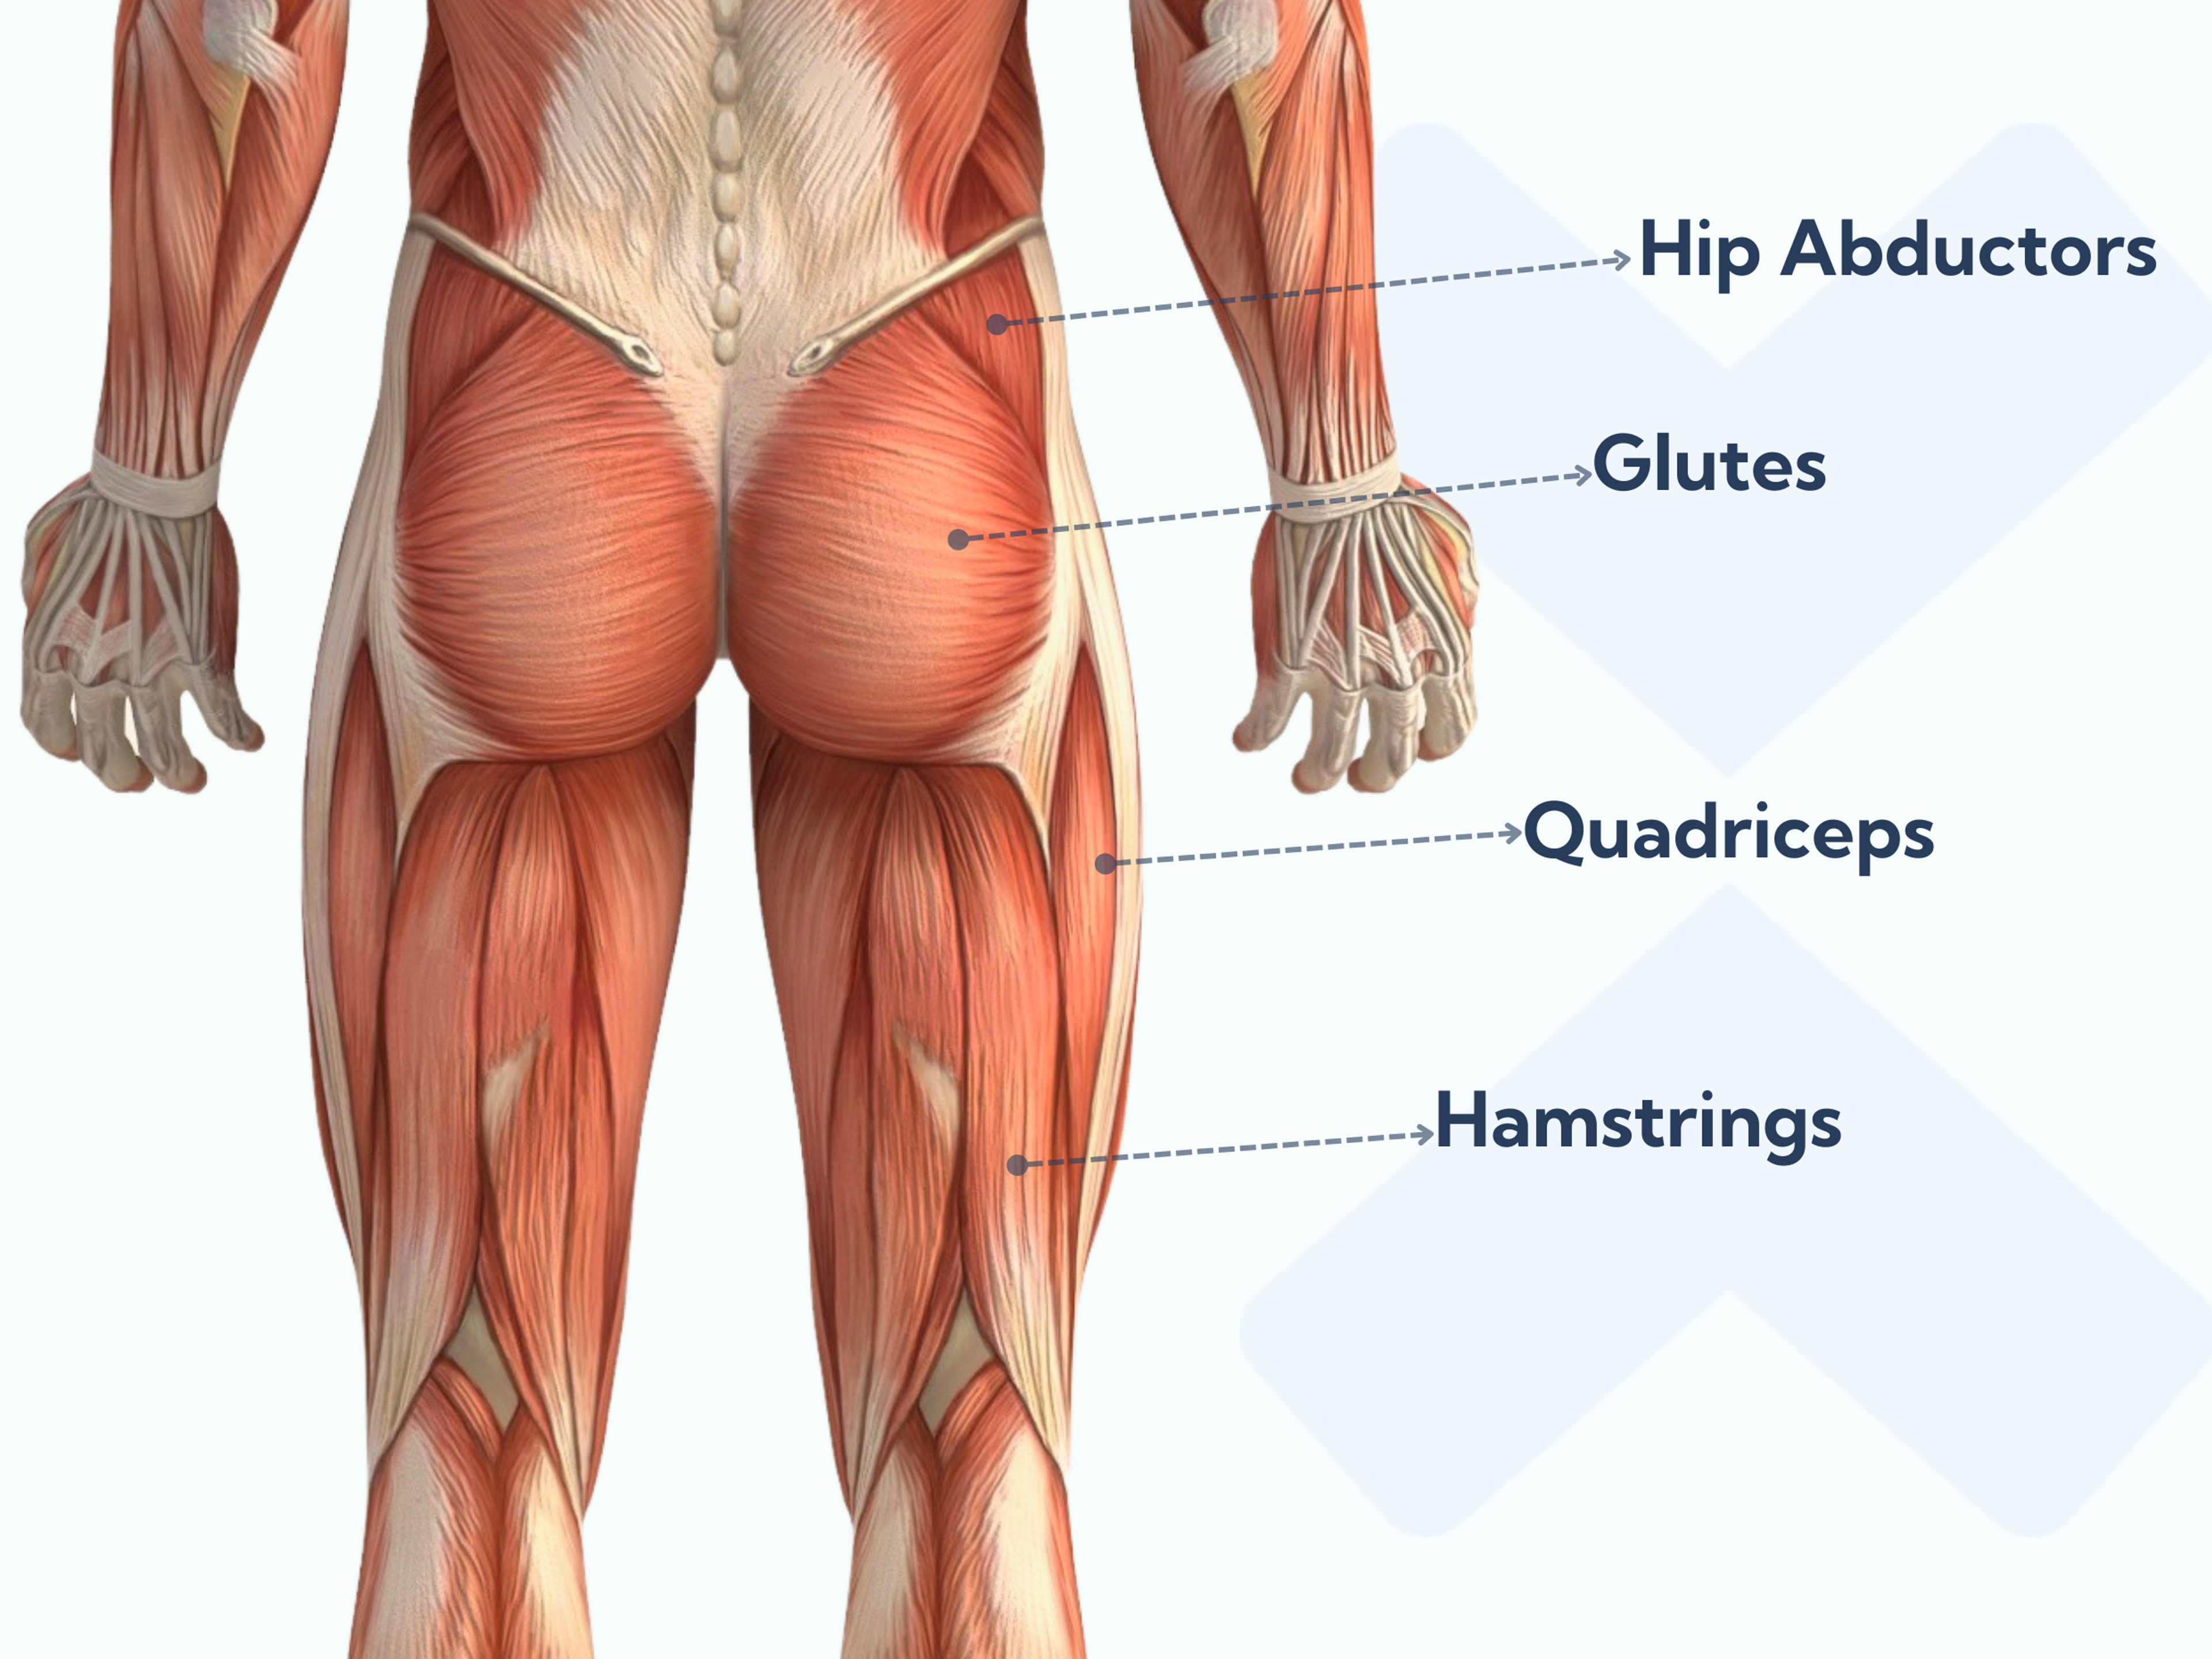 These are the muscles of the upper thigh and hip that you should strengthen to help your recovery from ankle sprains.